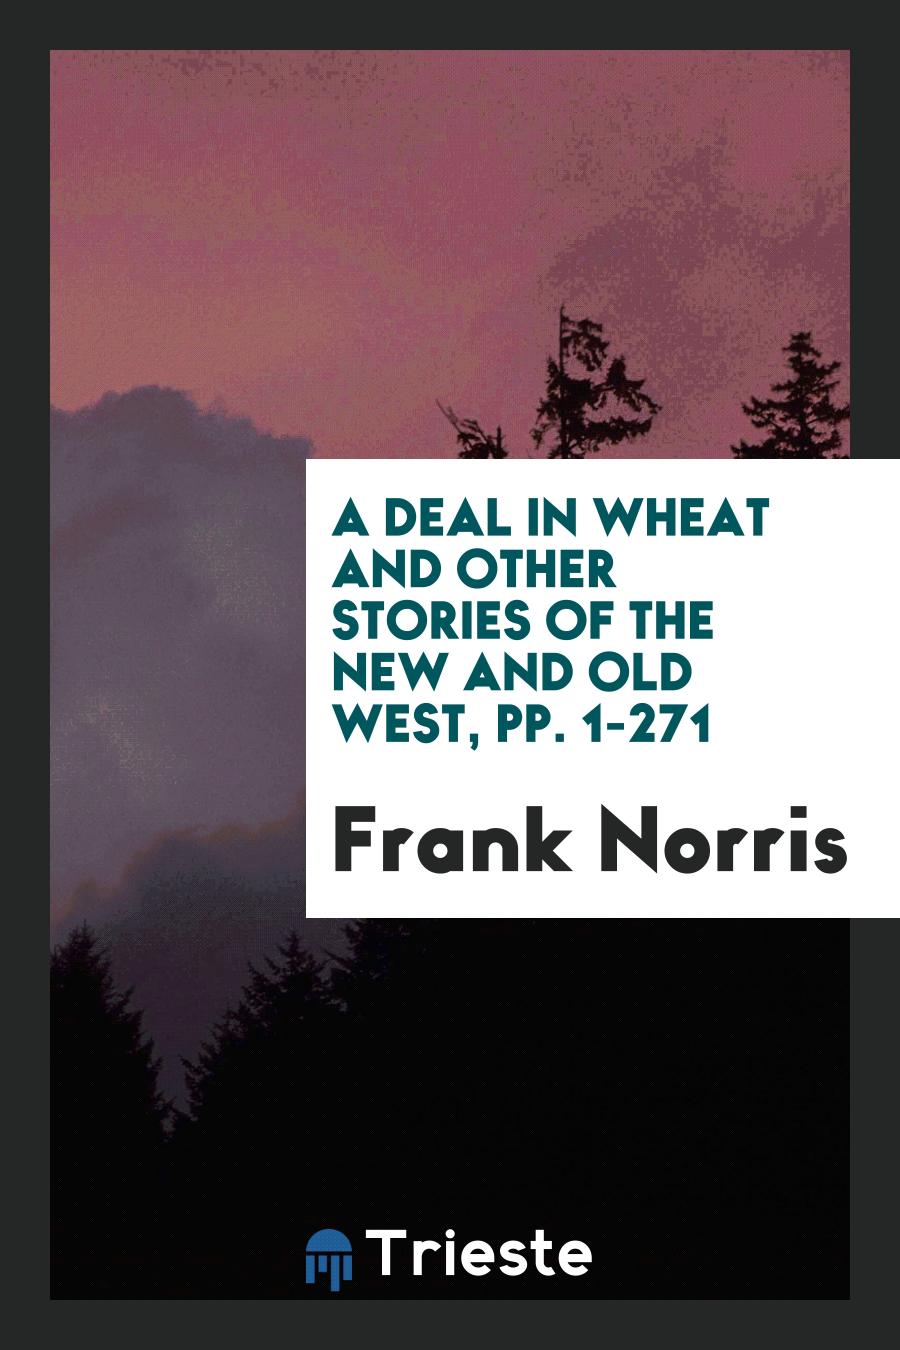 A Deal in Wheat and Other Stories of the New and Old West, pp. 1-271